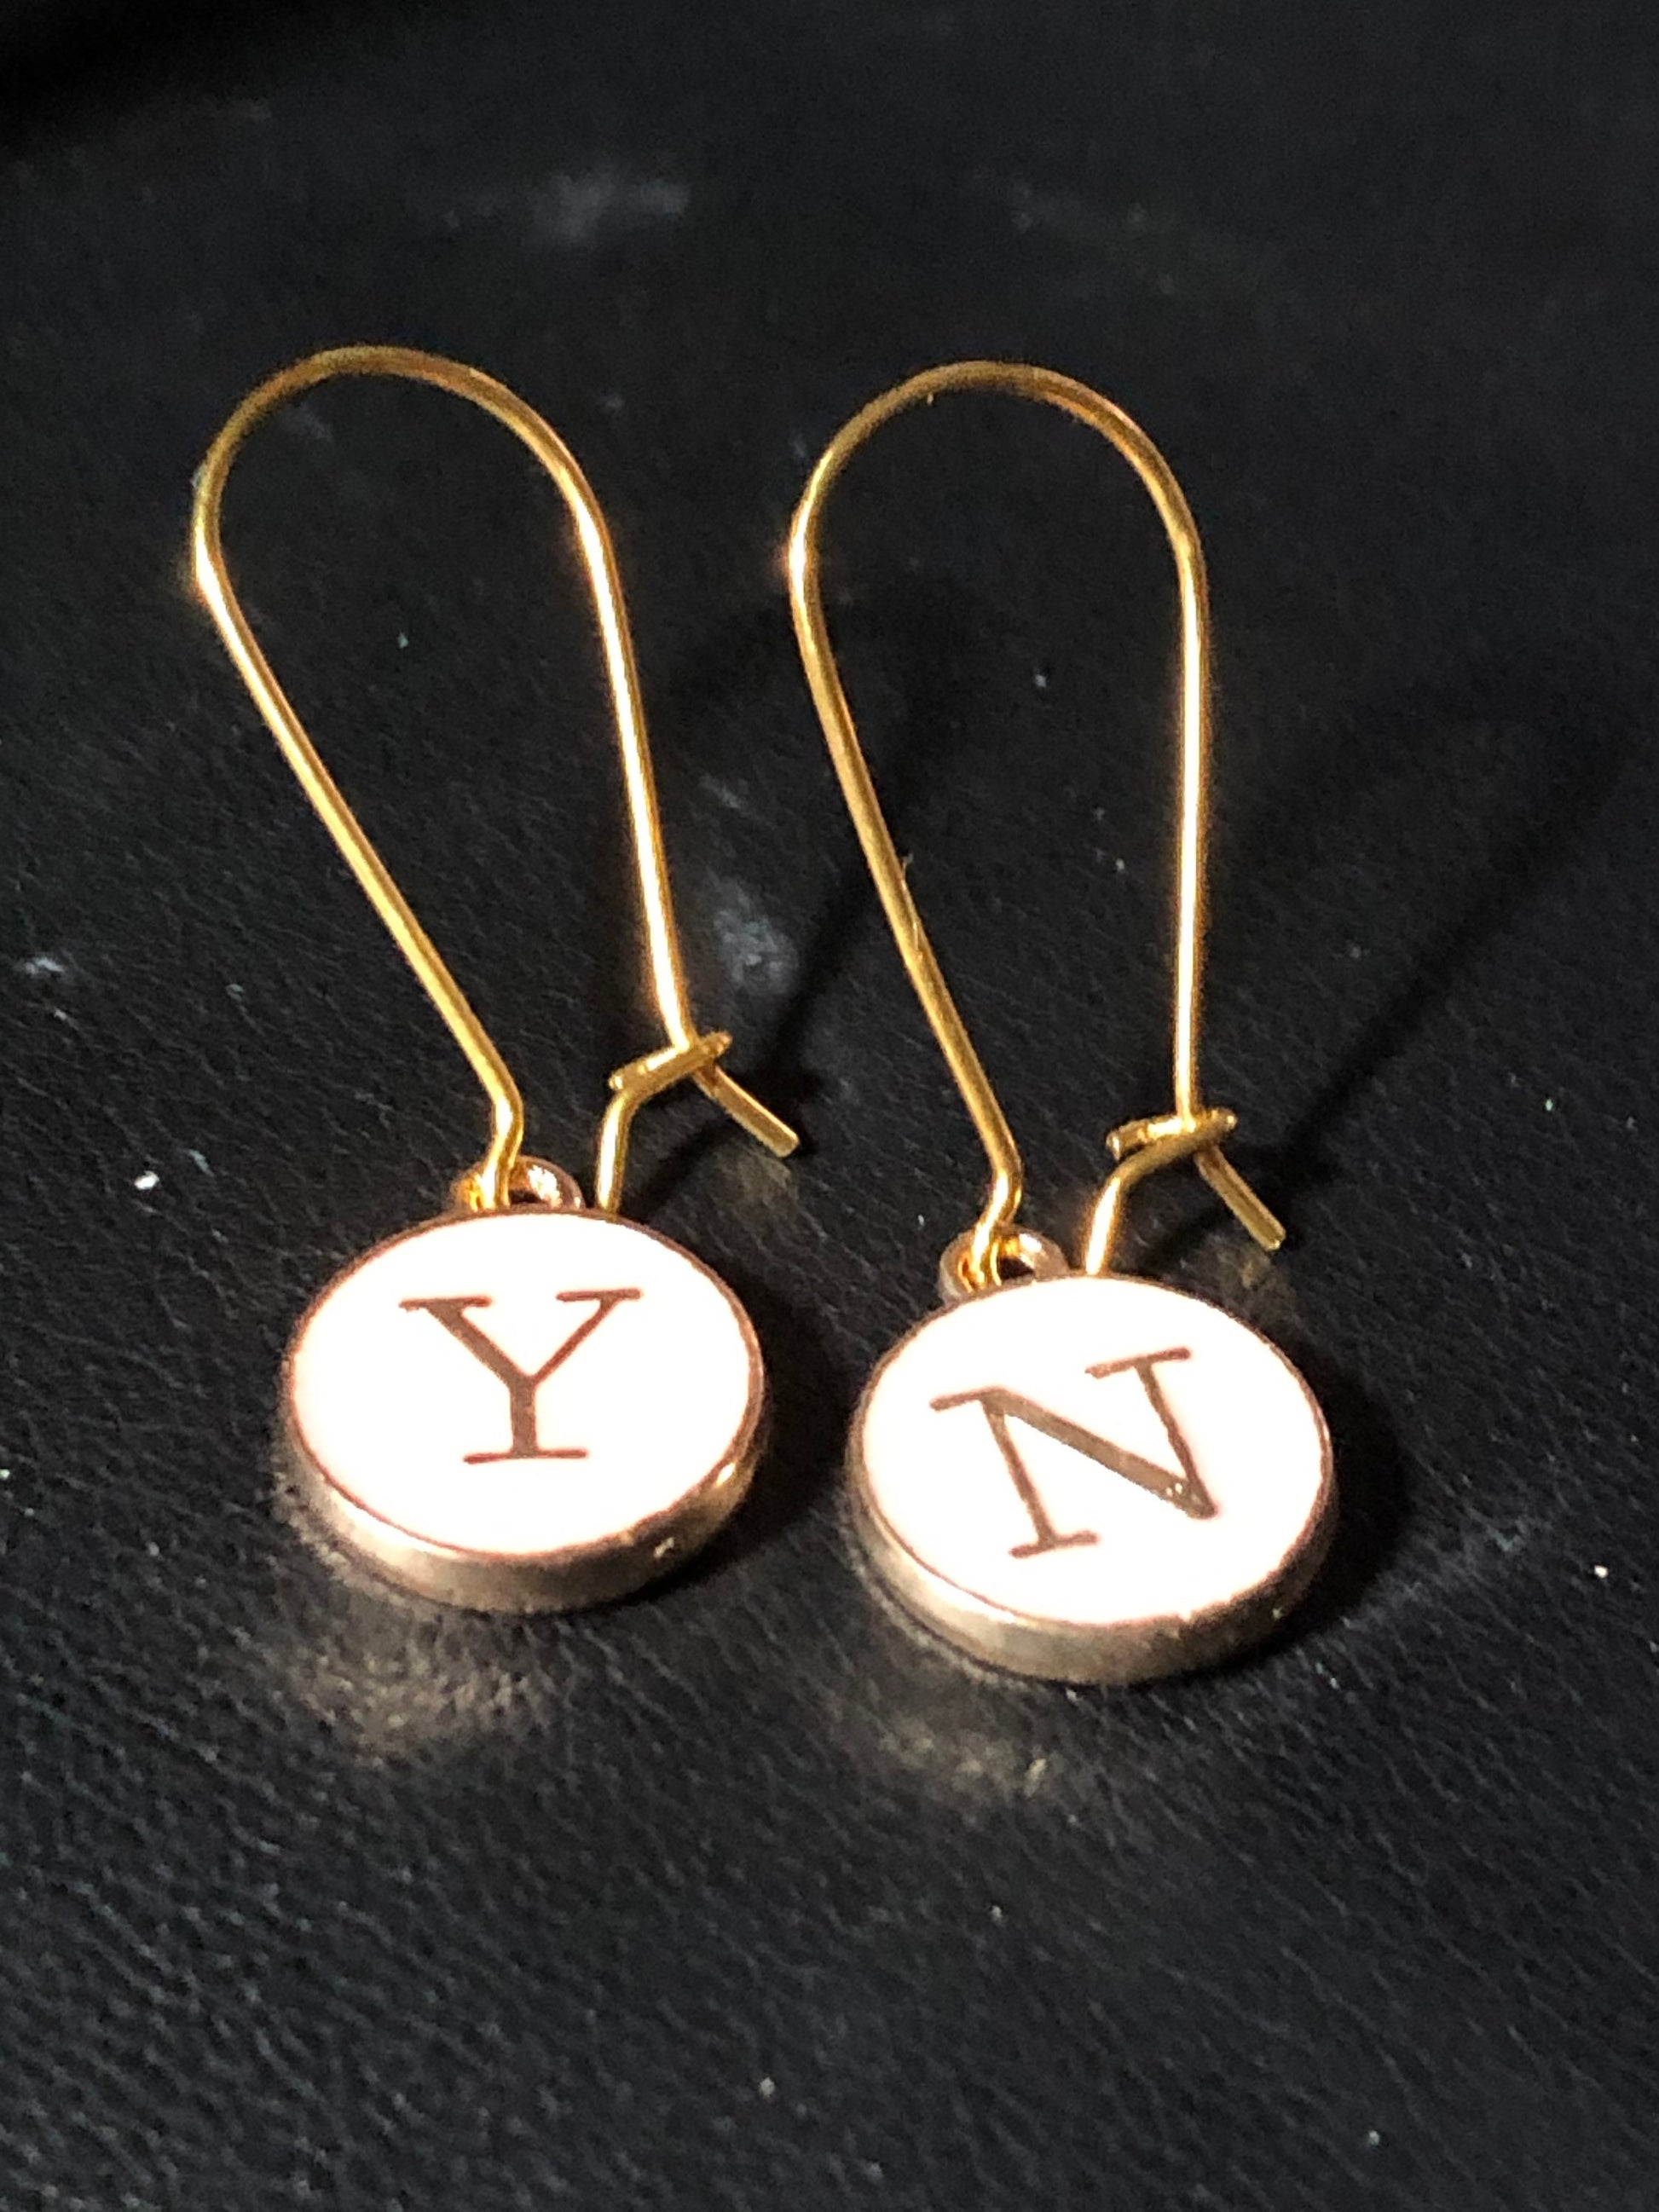 Novelty sexy yes no earrings pink enamel gold tone